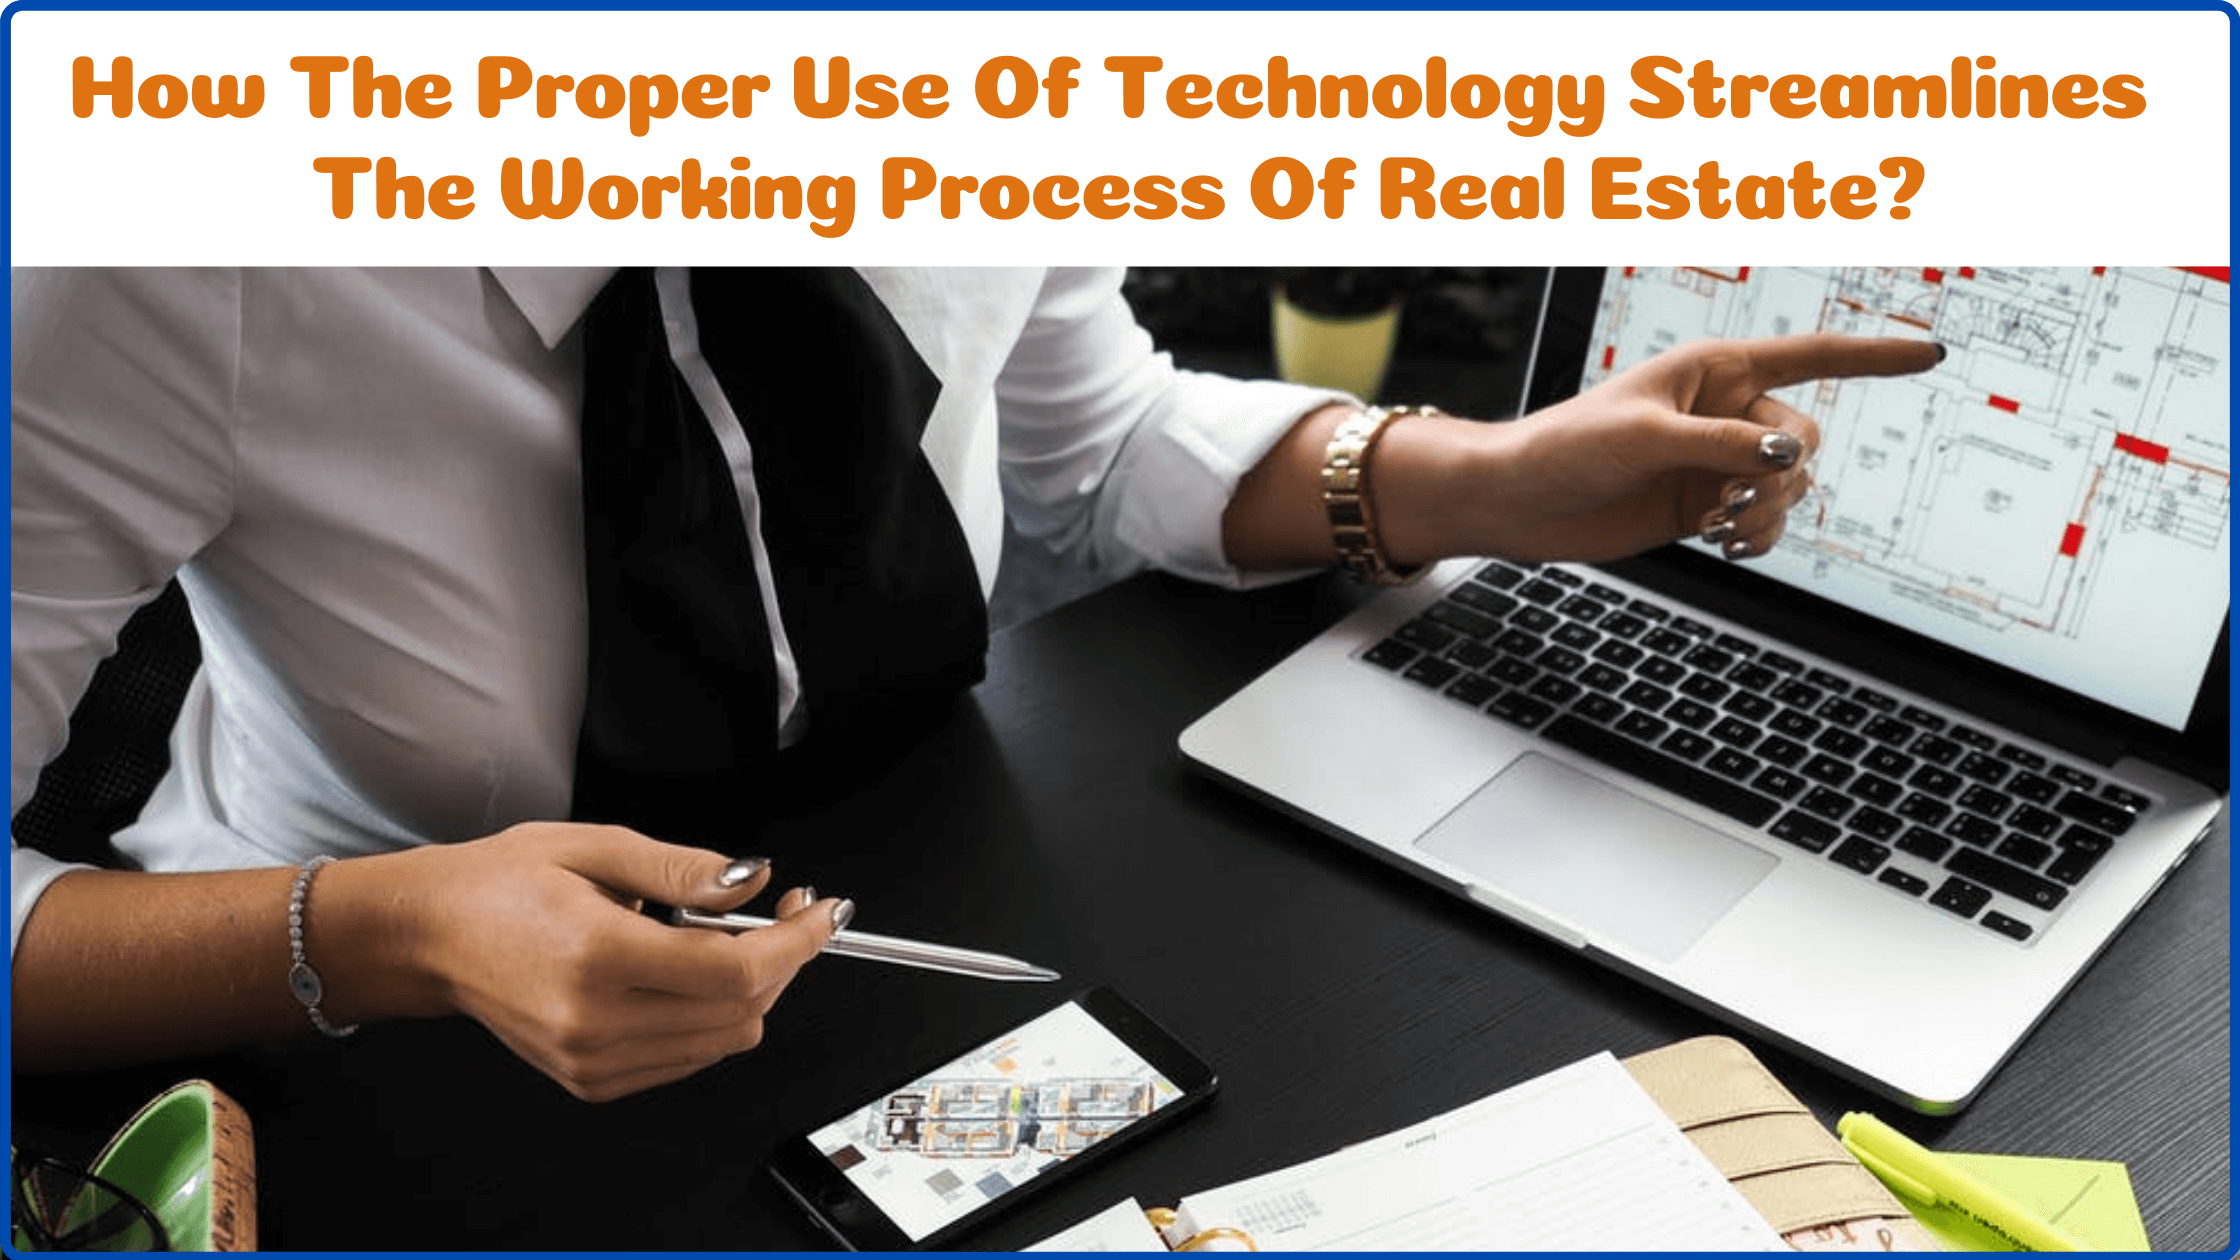 How the proper use of technology streamlines the working process of Real Estate? - Commercial real estate austin, GW Partners